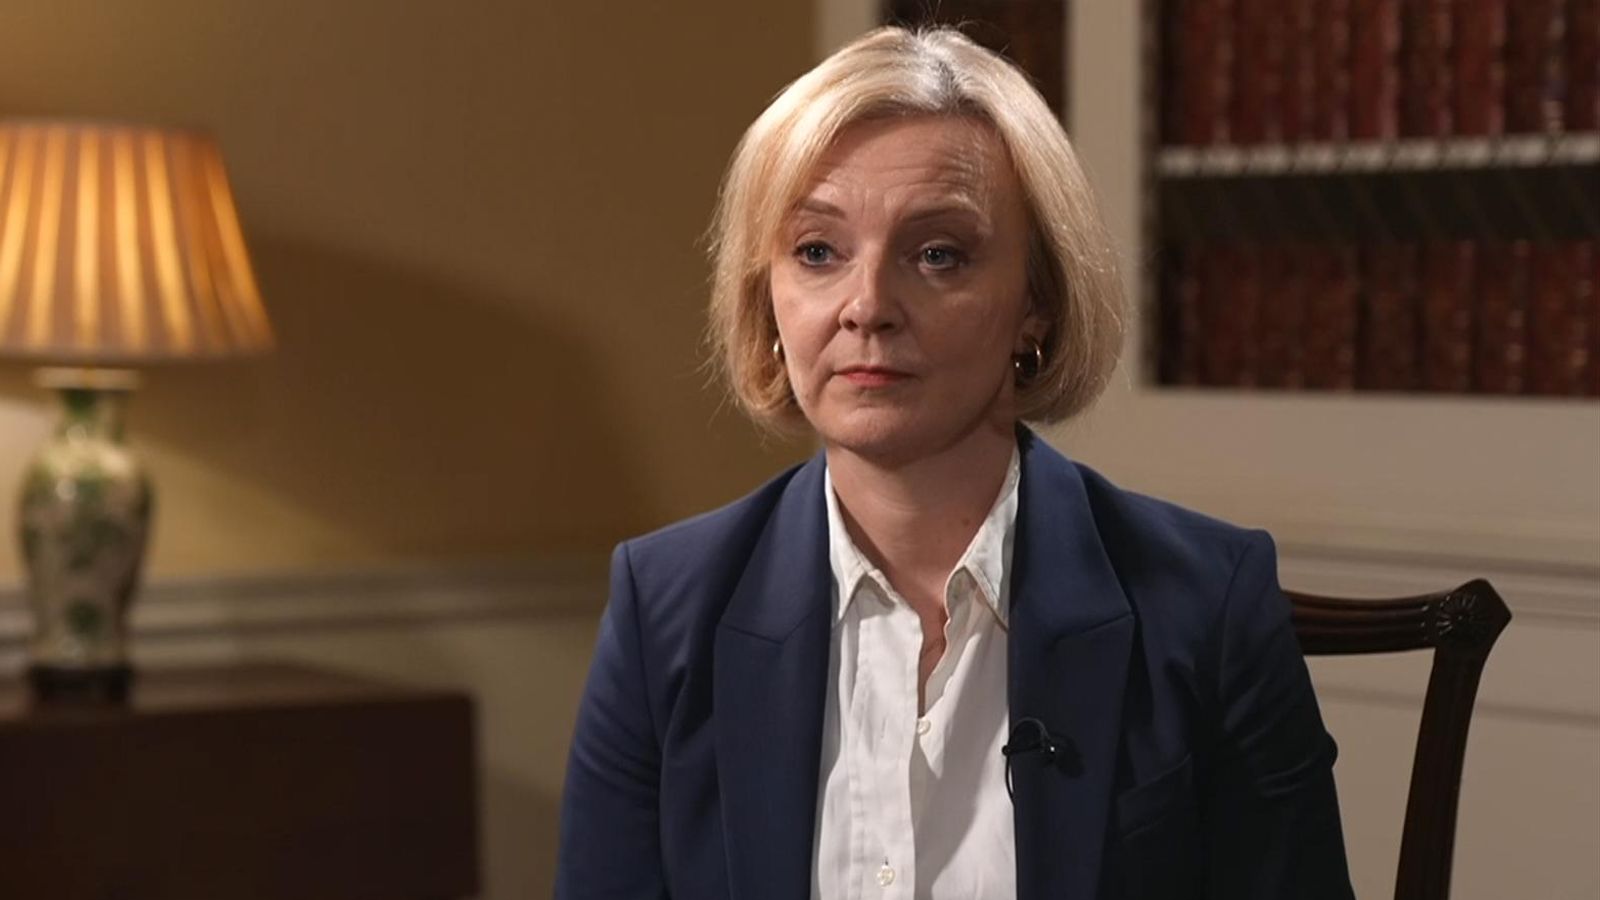 PM Liz Truss says sorry for 'mistakes' in first few volatile weeks in office